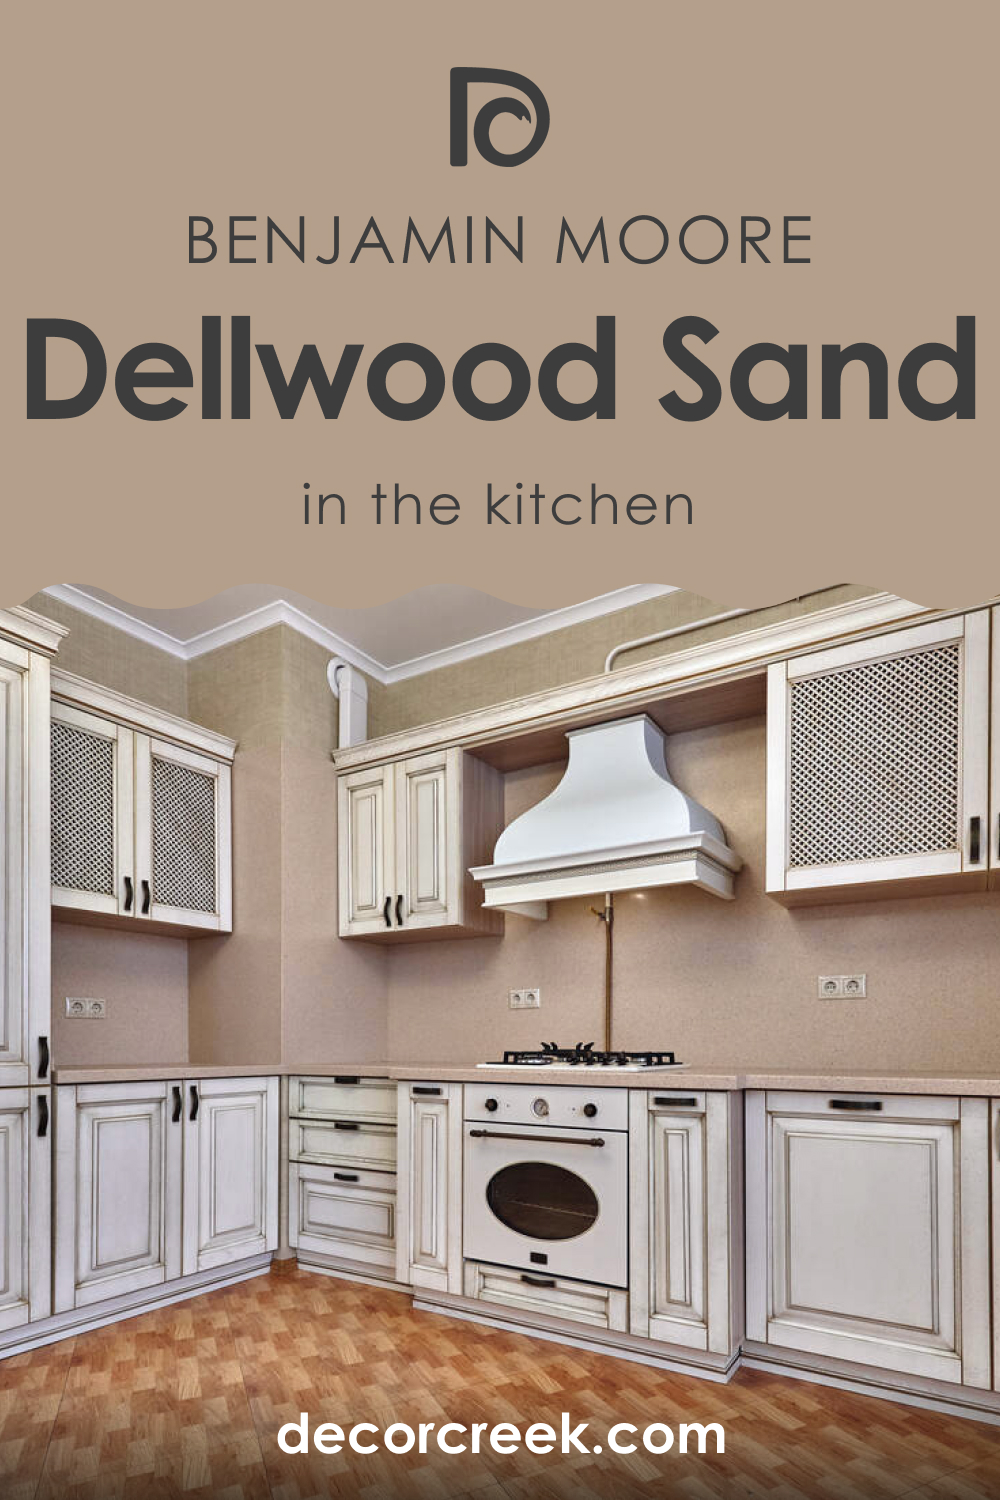 Dellwood Sand 1019 in the Kitchen